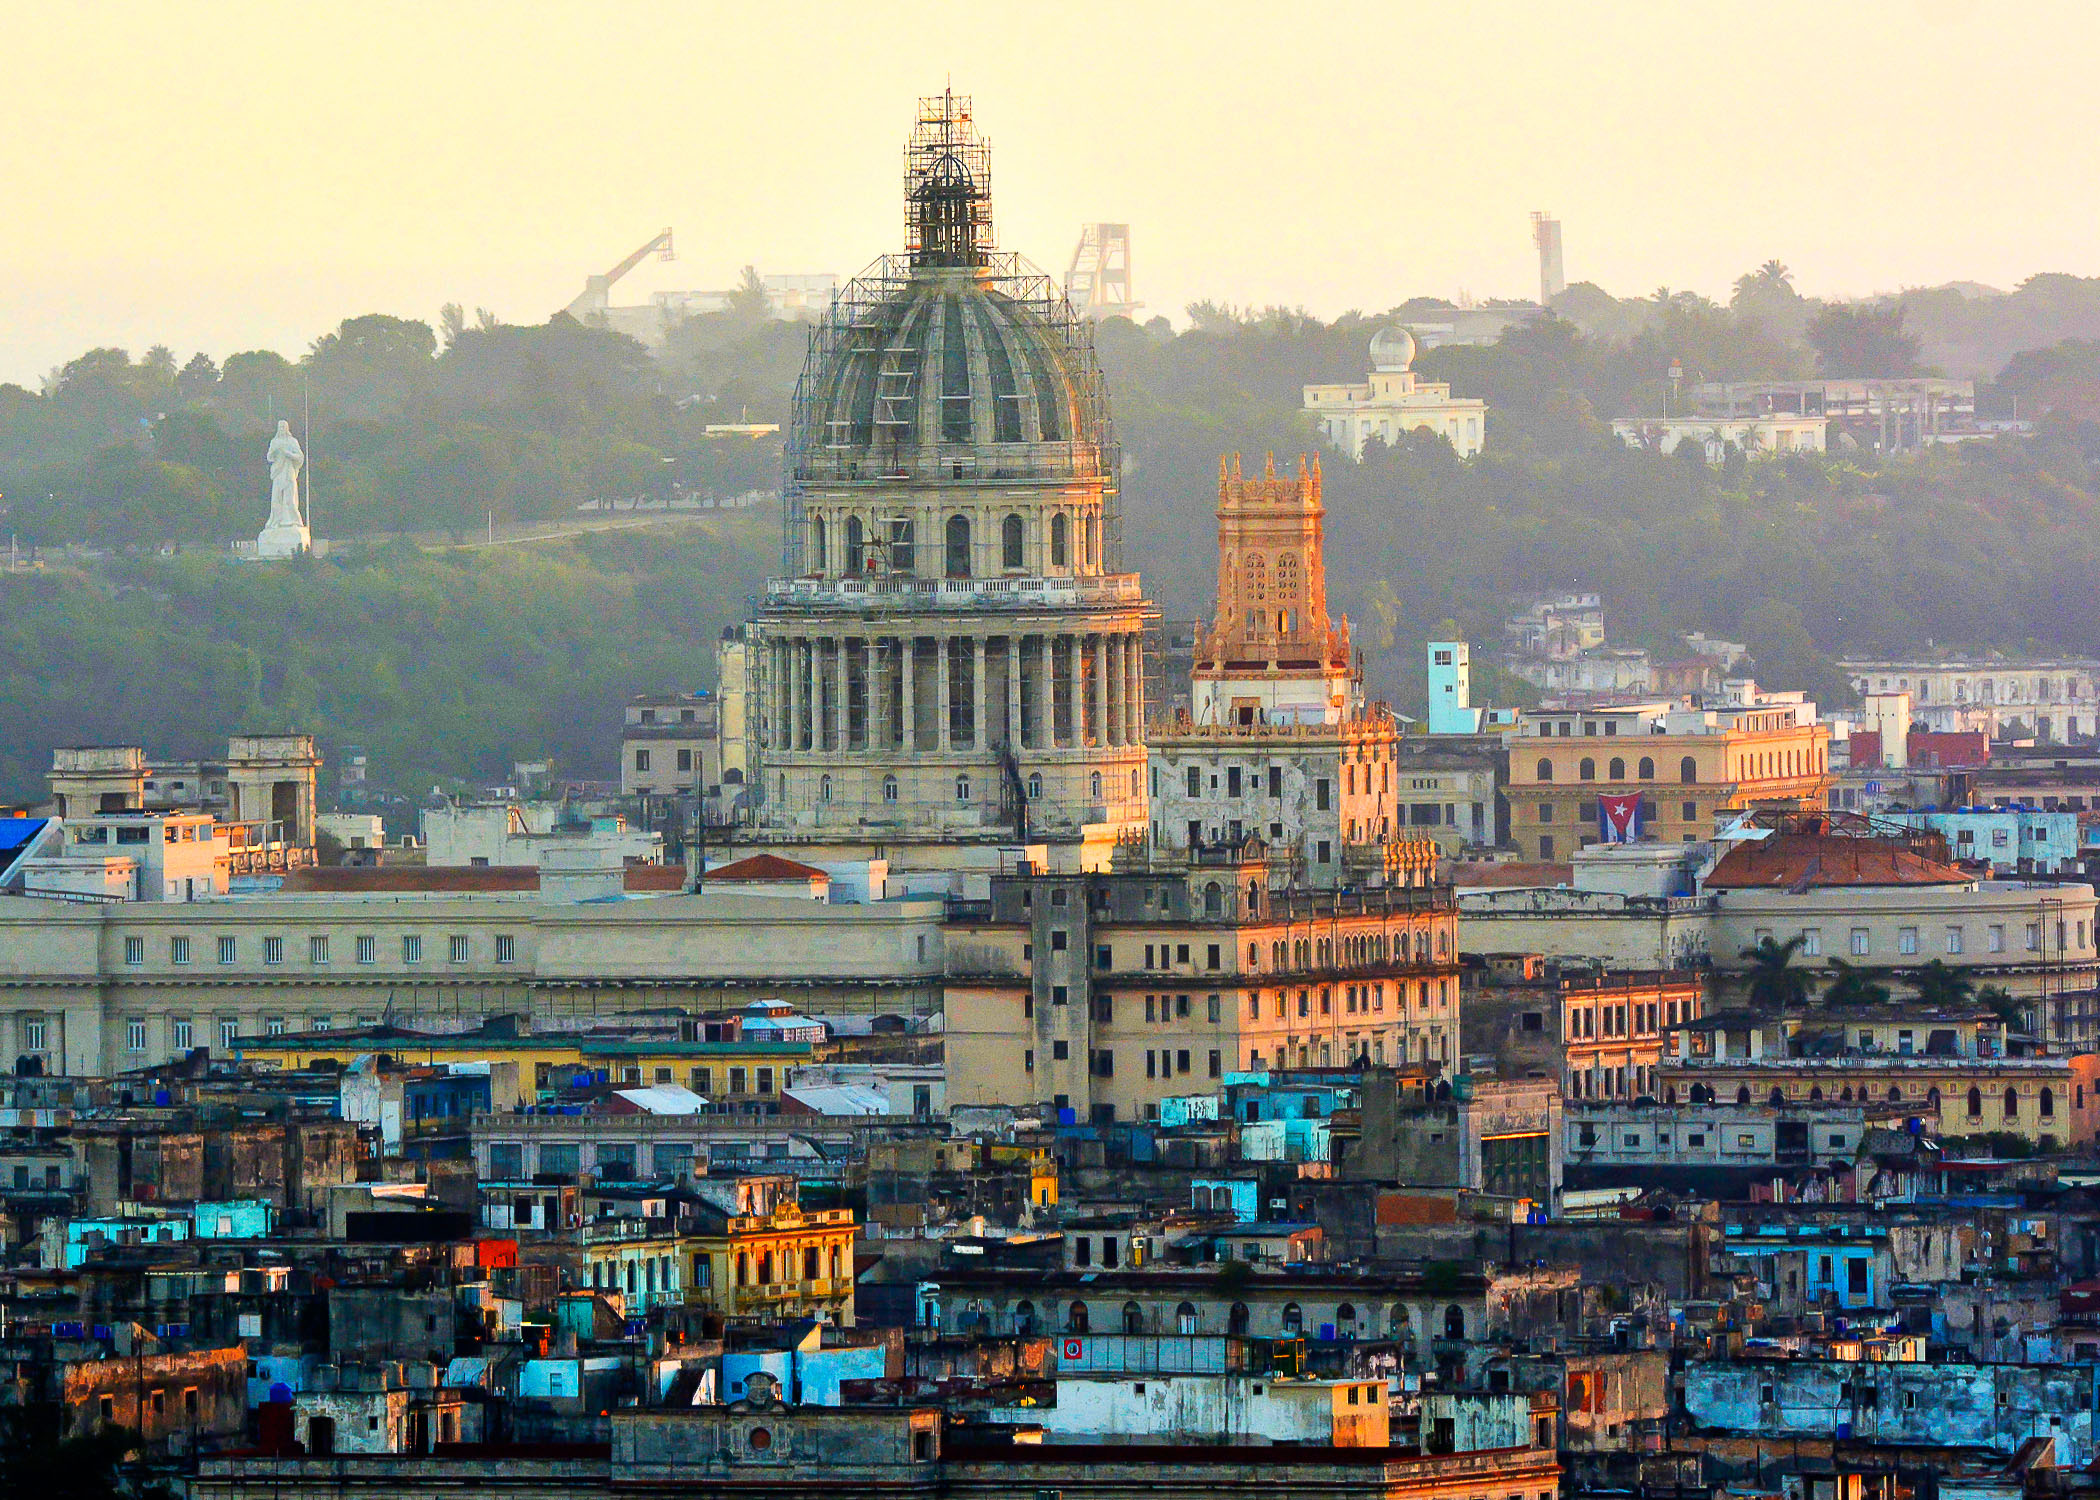 A Facelift For Old Havana On Its 500th Anniversary